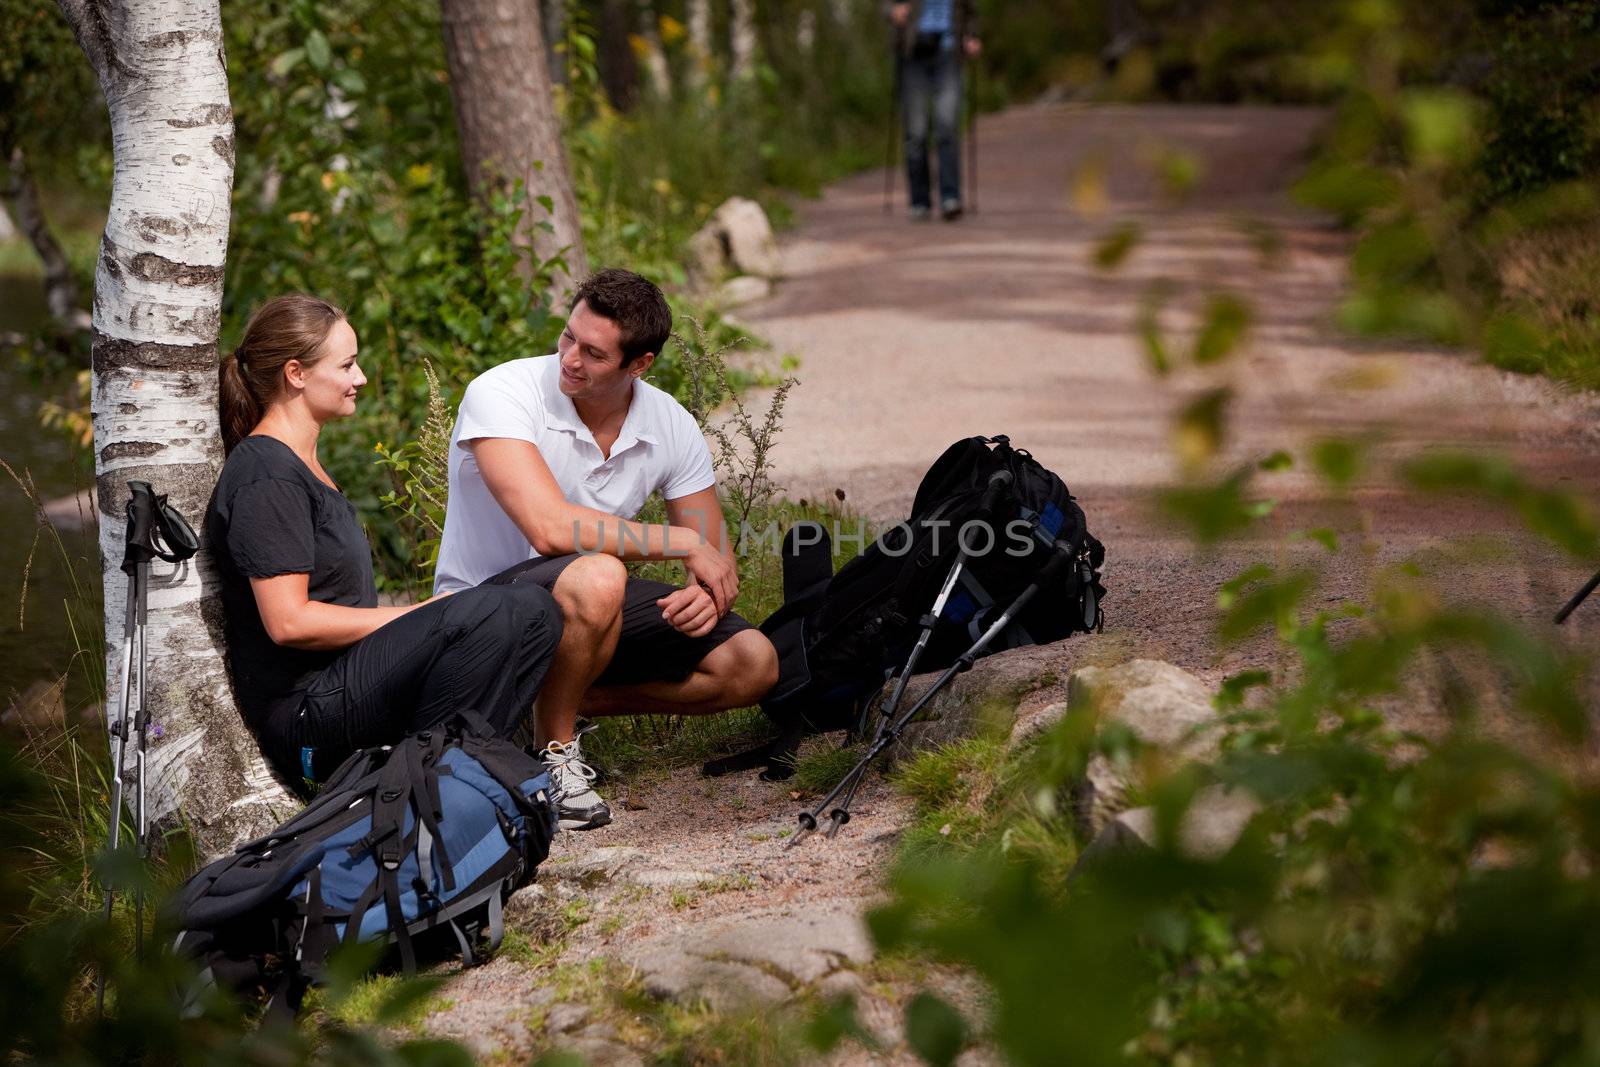 A couple take a break while backpacking on a prepared trail